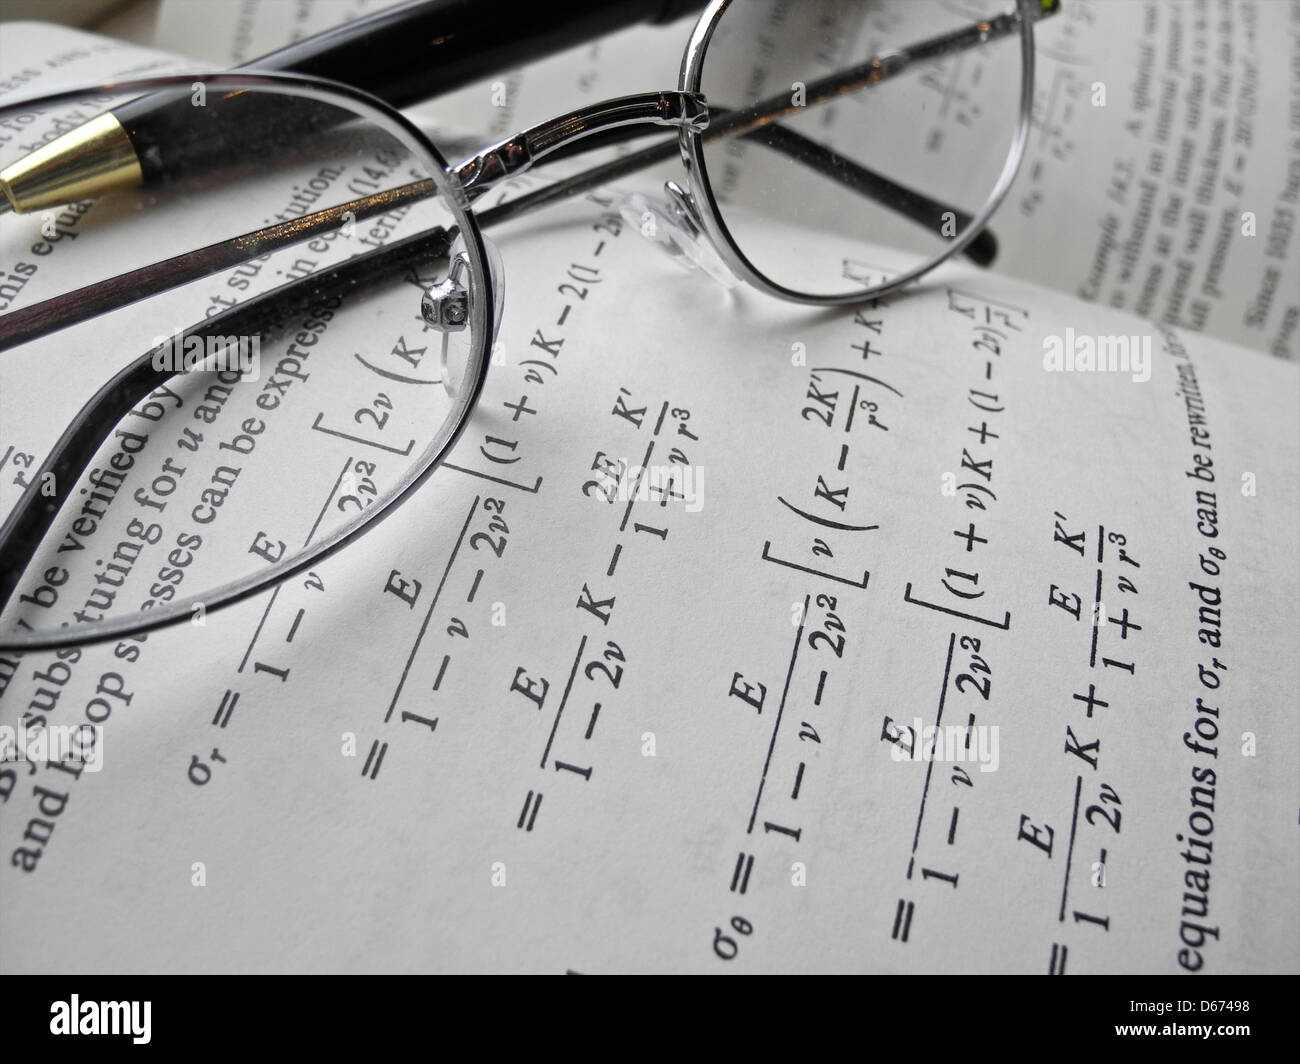 Mathematical equations and calculations for engineering studies and practice. Stock Photo